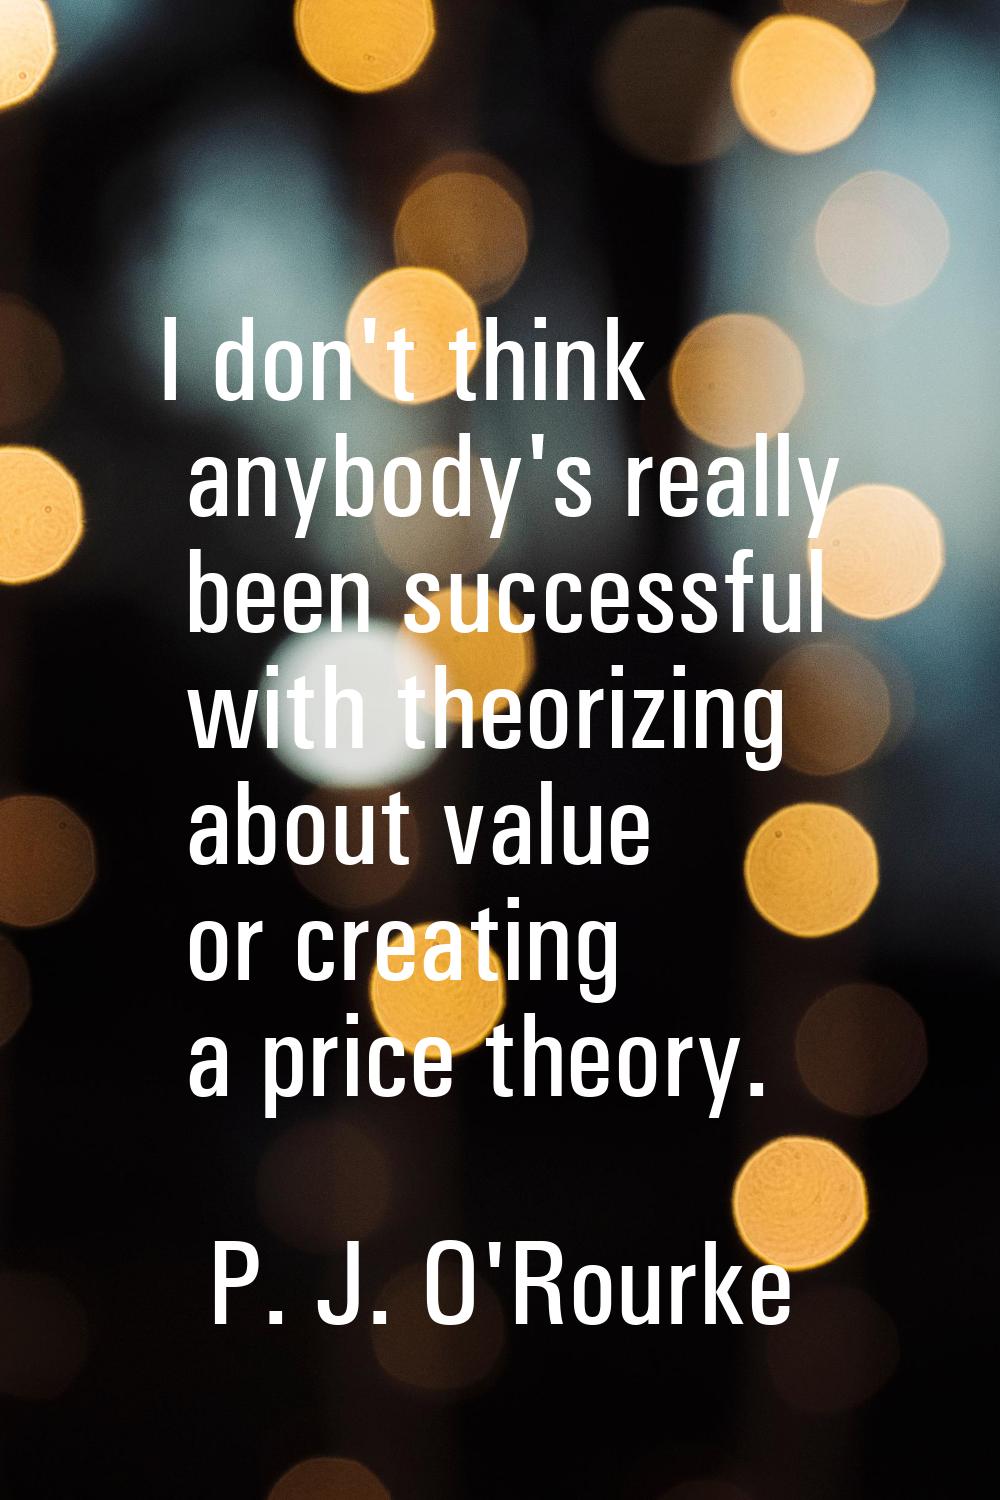 I don't think anybody's really been successful with theorizing about value or creating a price theo